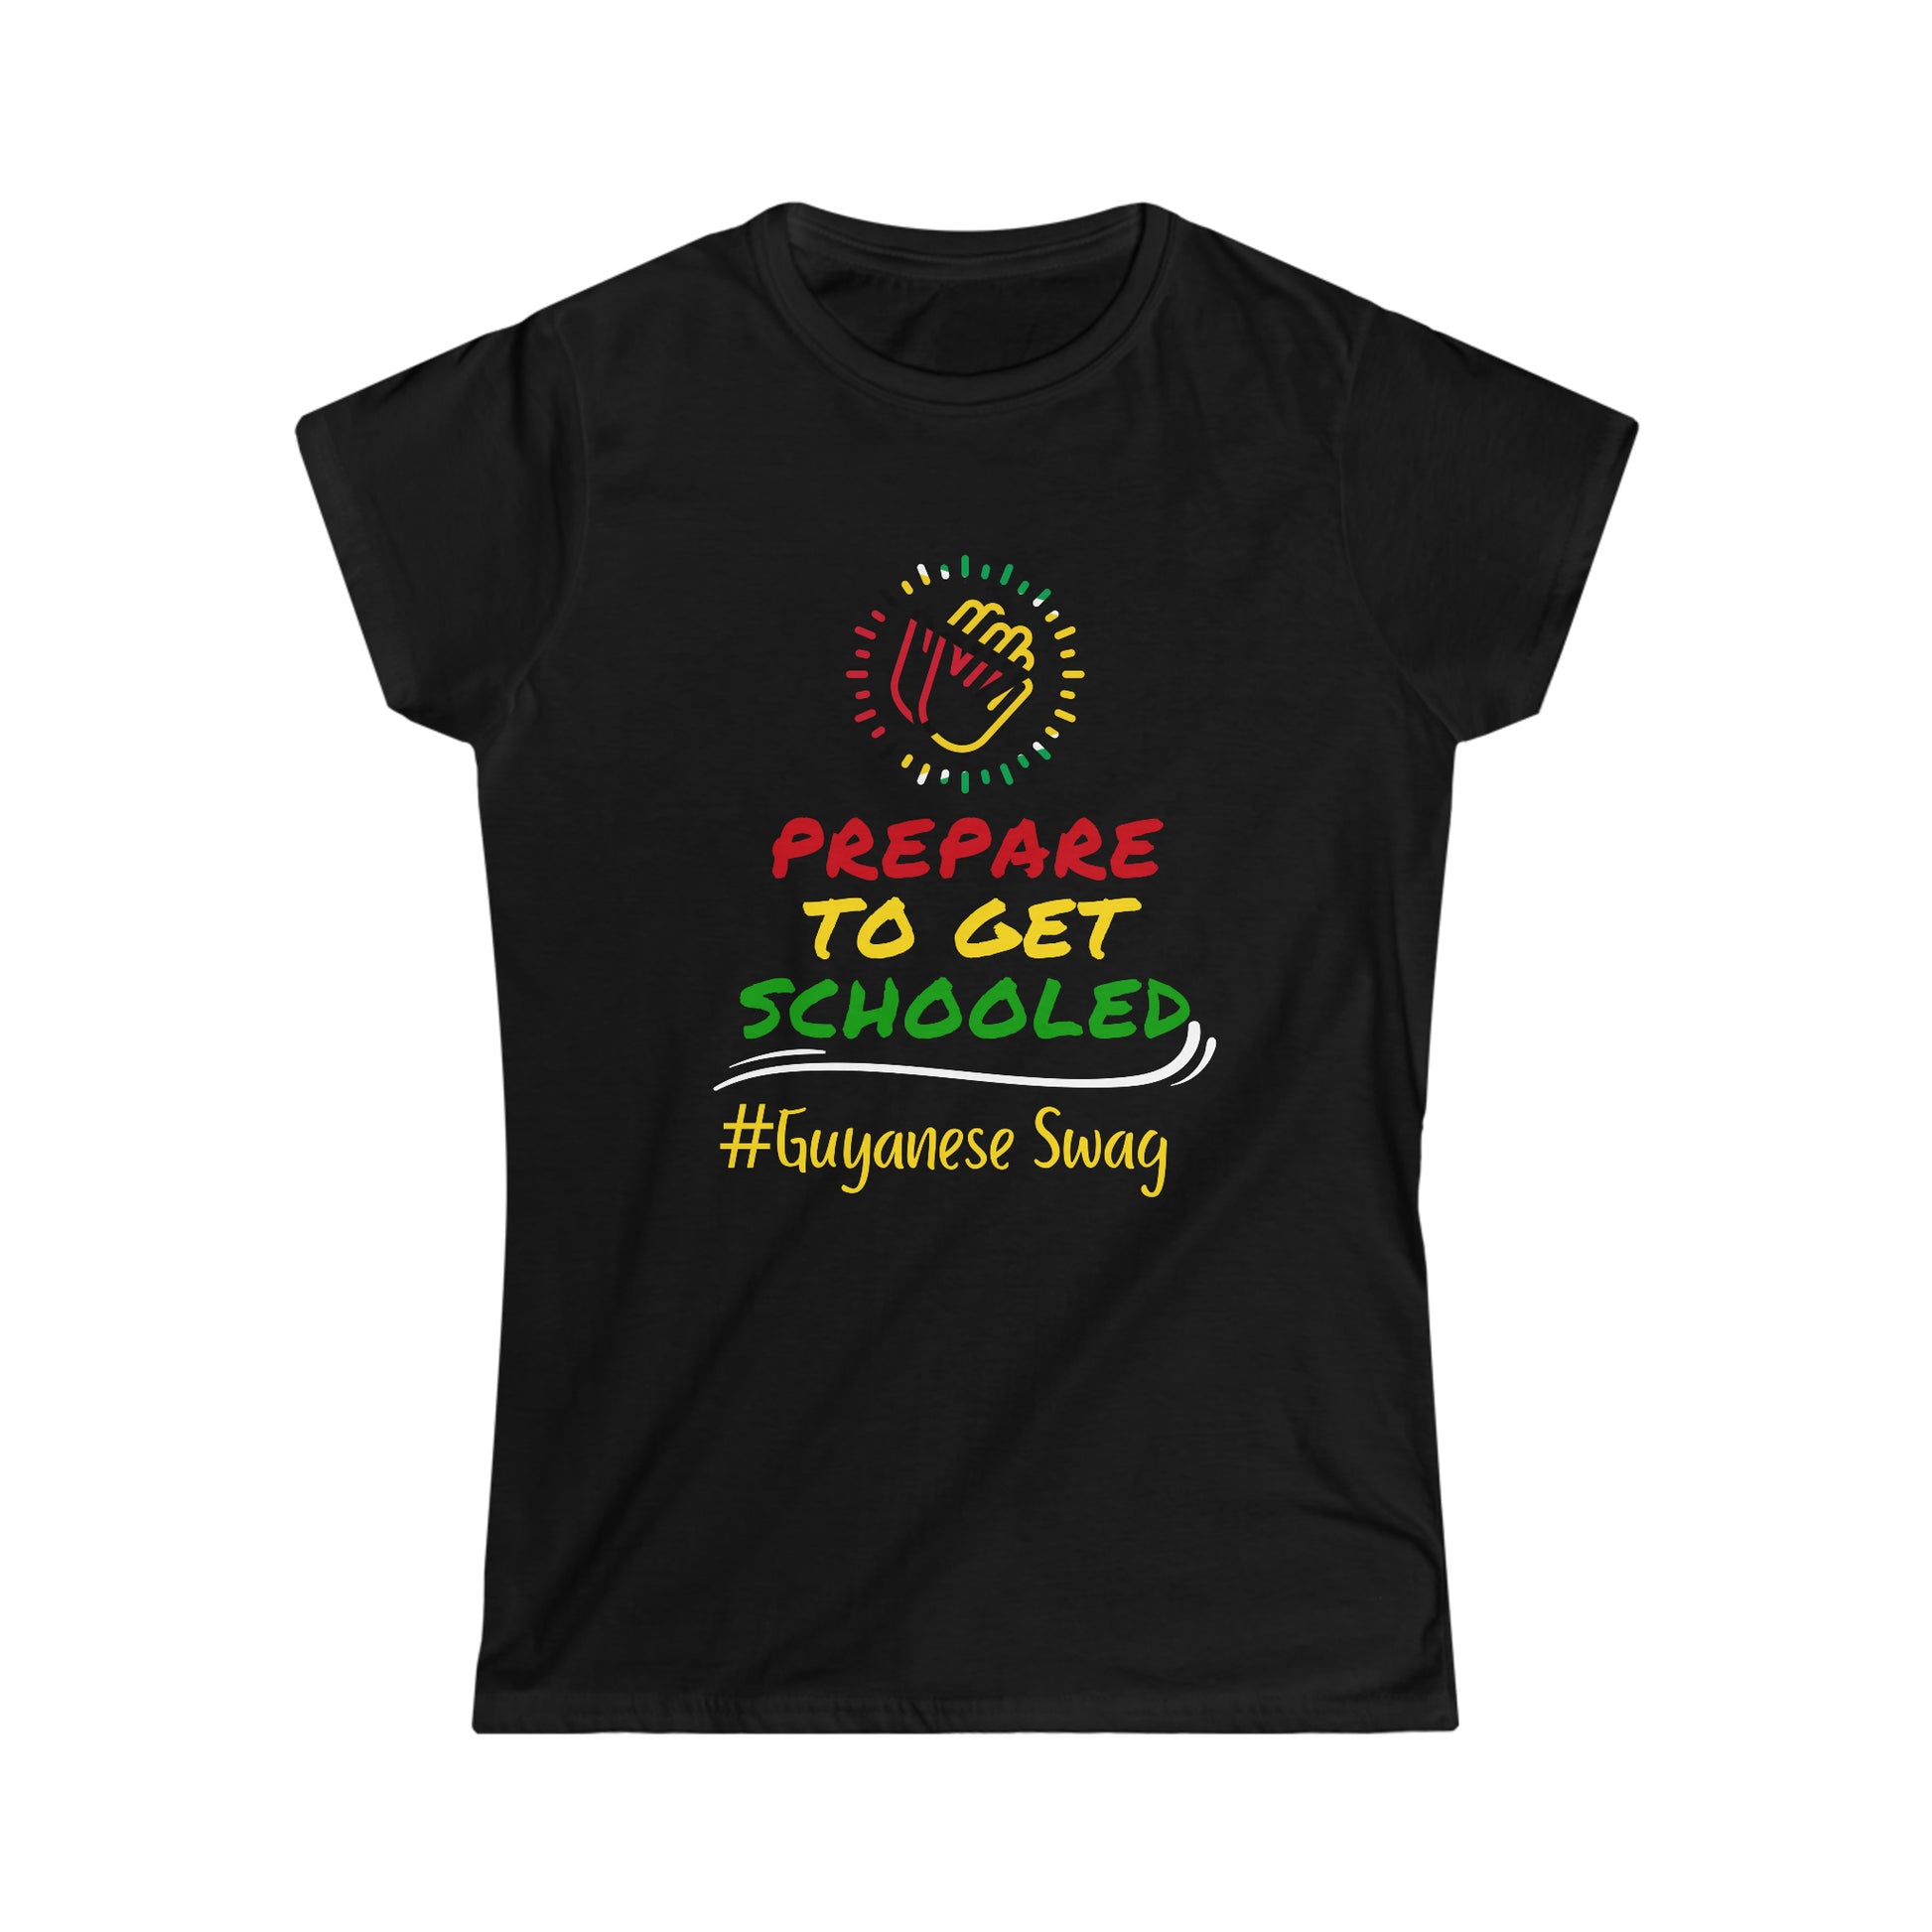 Guyanese Swag Prepared to Get Schooled Woman's Black Softstyle Tee with Guyana Flag.